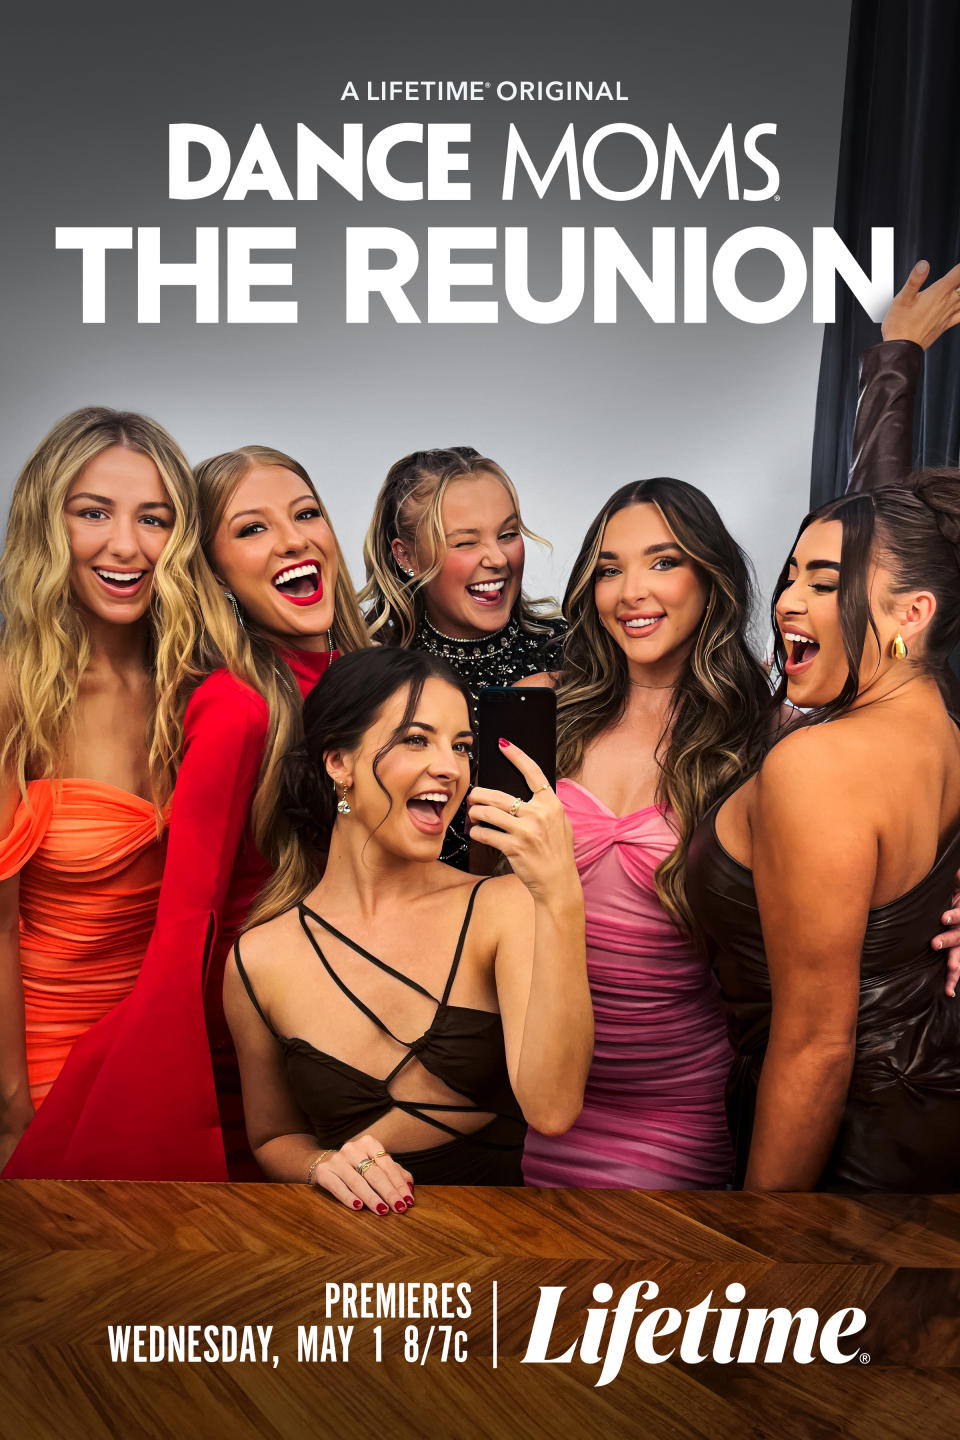 Reunion poster of 'Dance Moms' cast with six women smiling, posing for a selfie, dressed in elegant evening wear